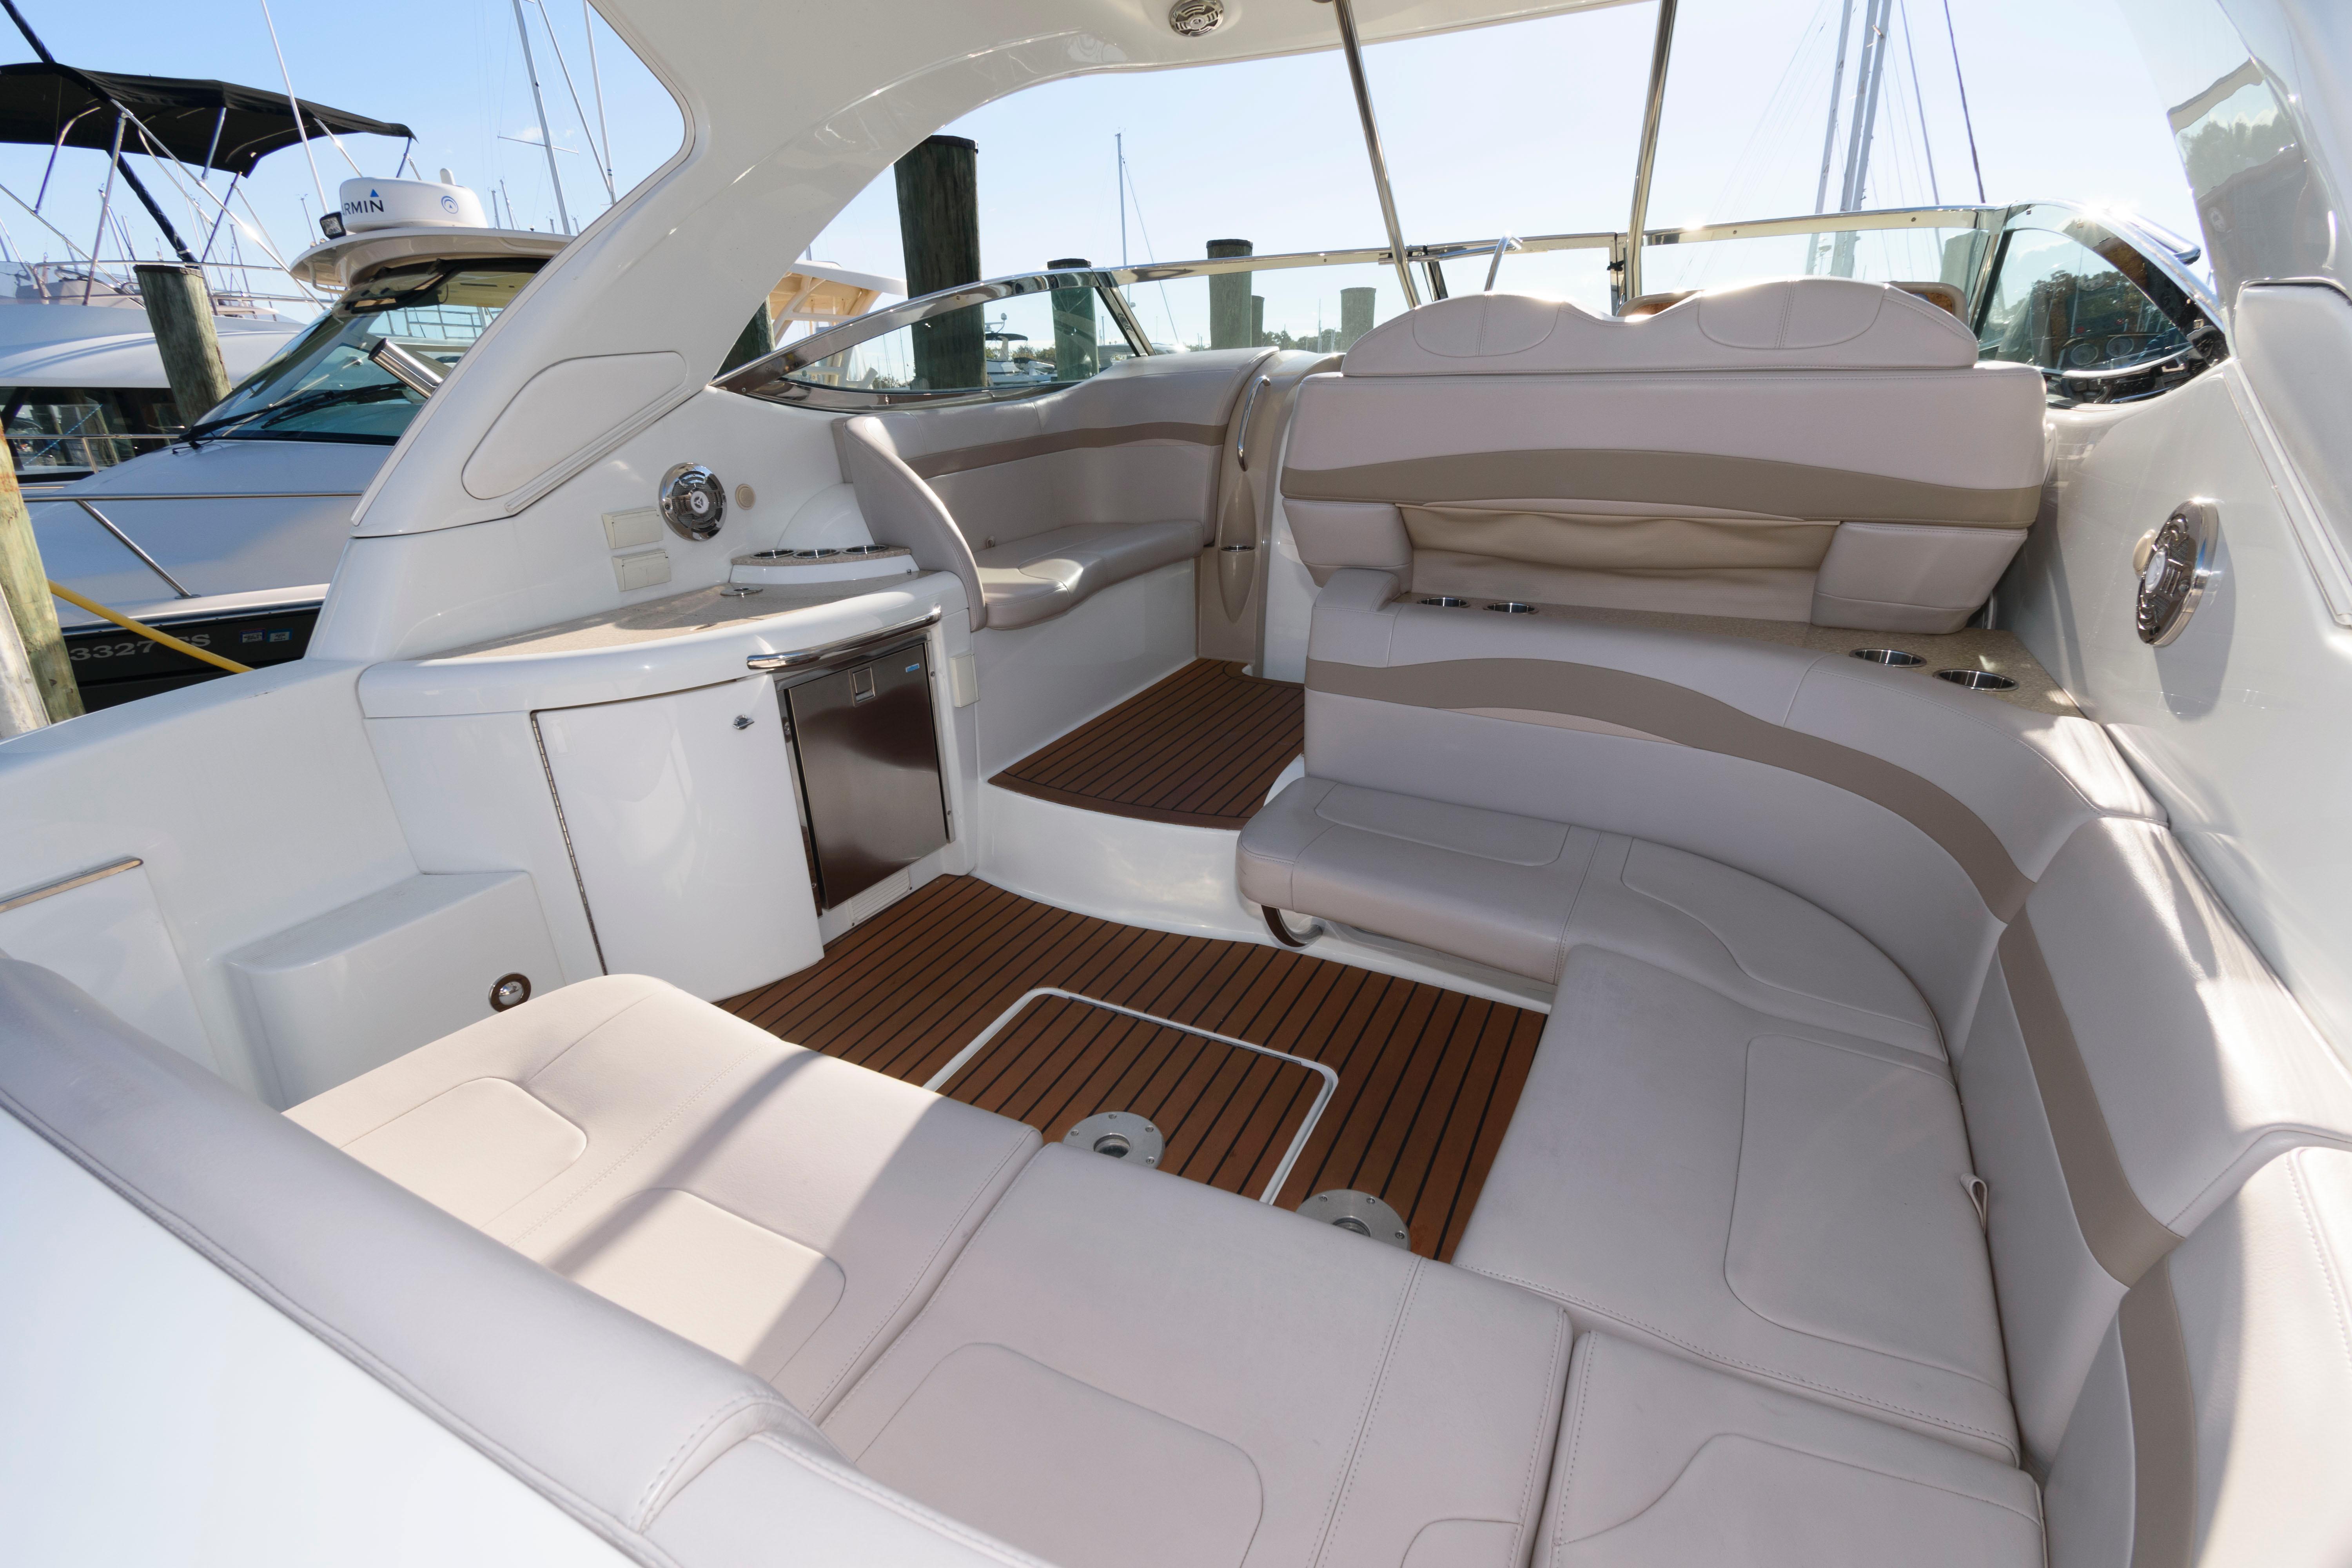 M 6639 RD Knot 10 Yacht Sales